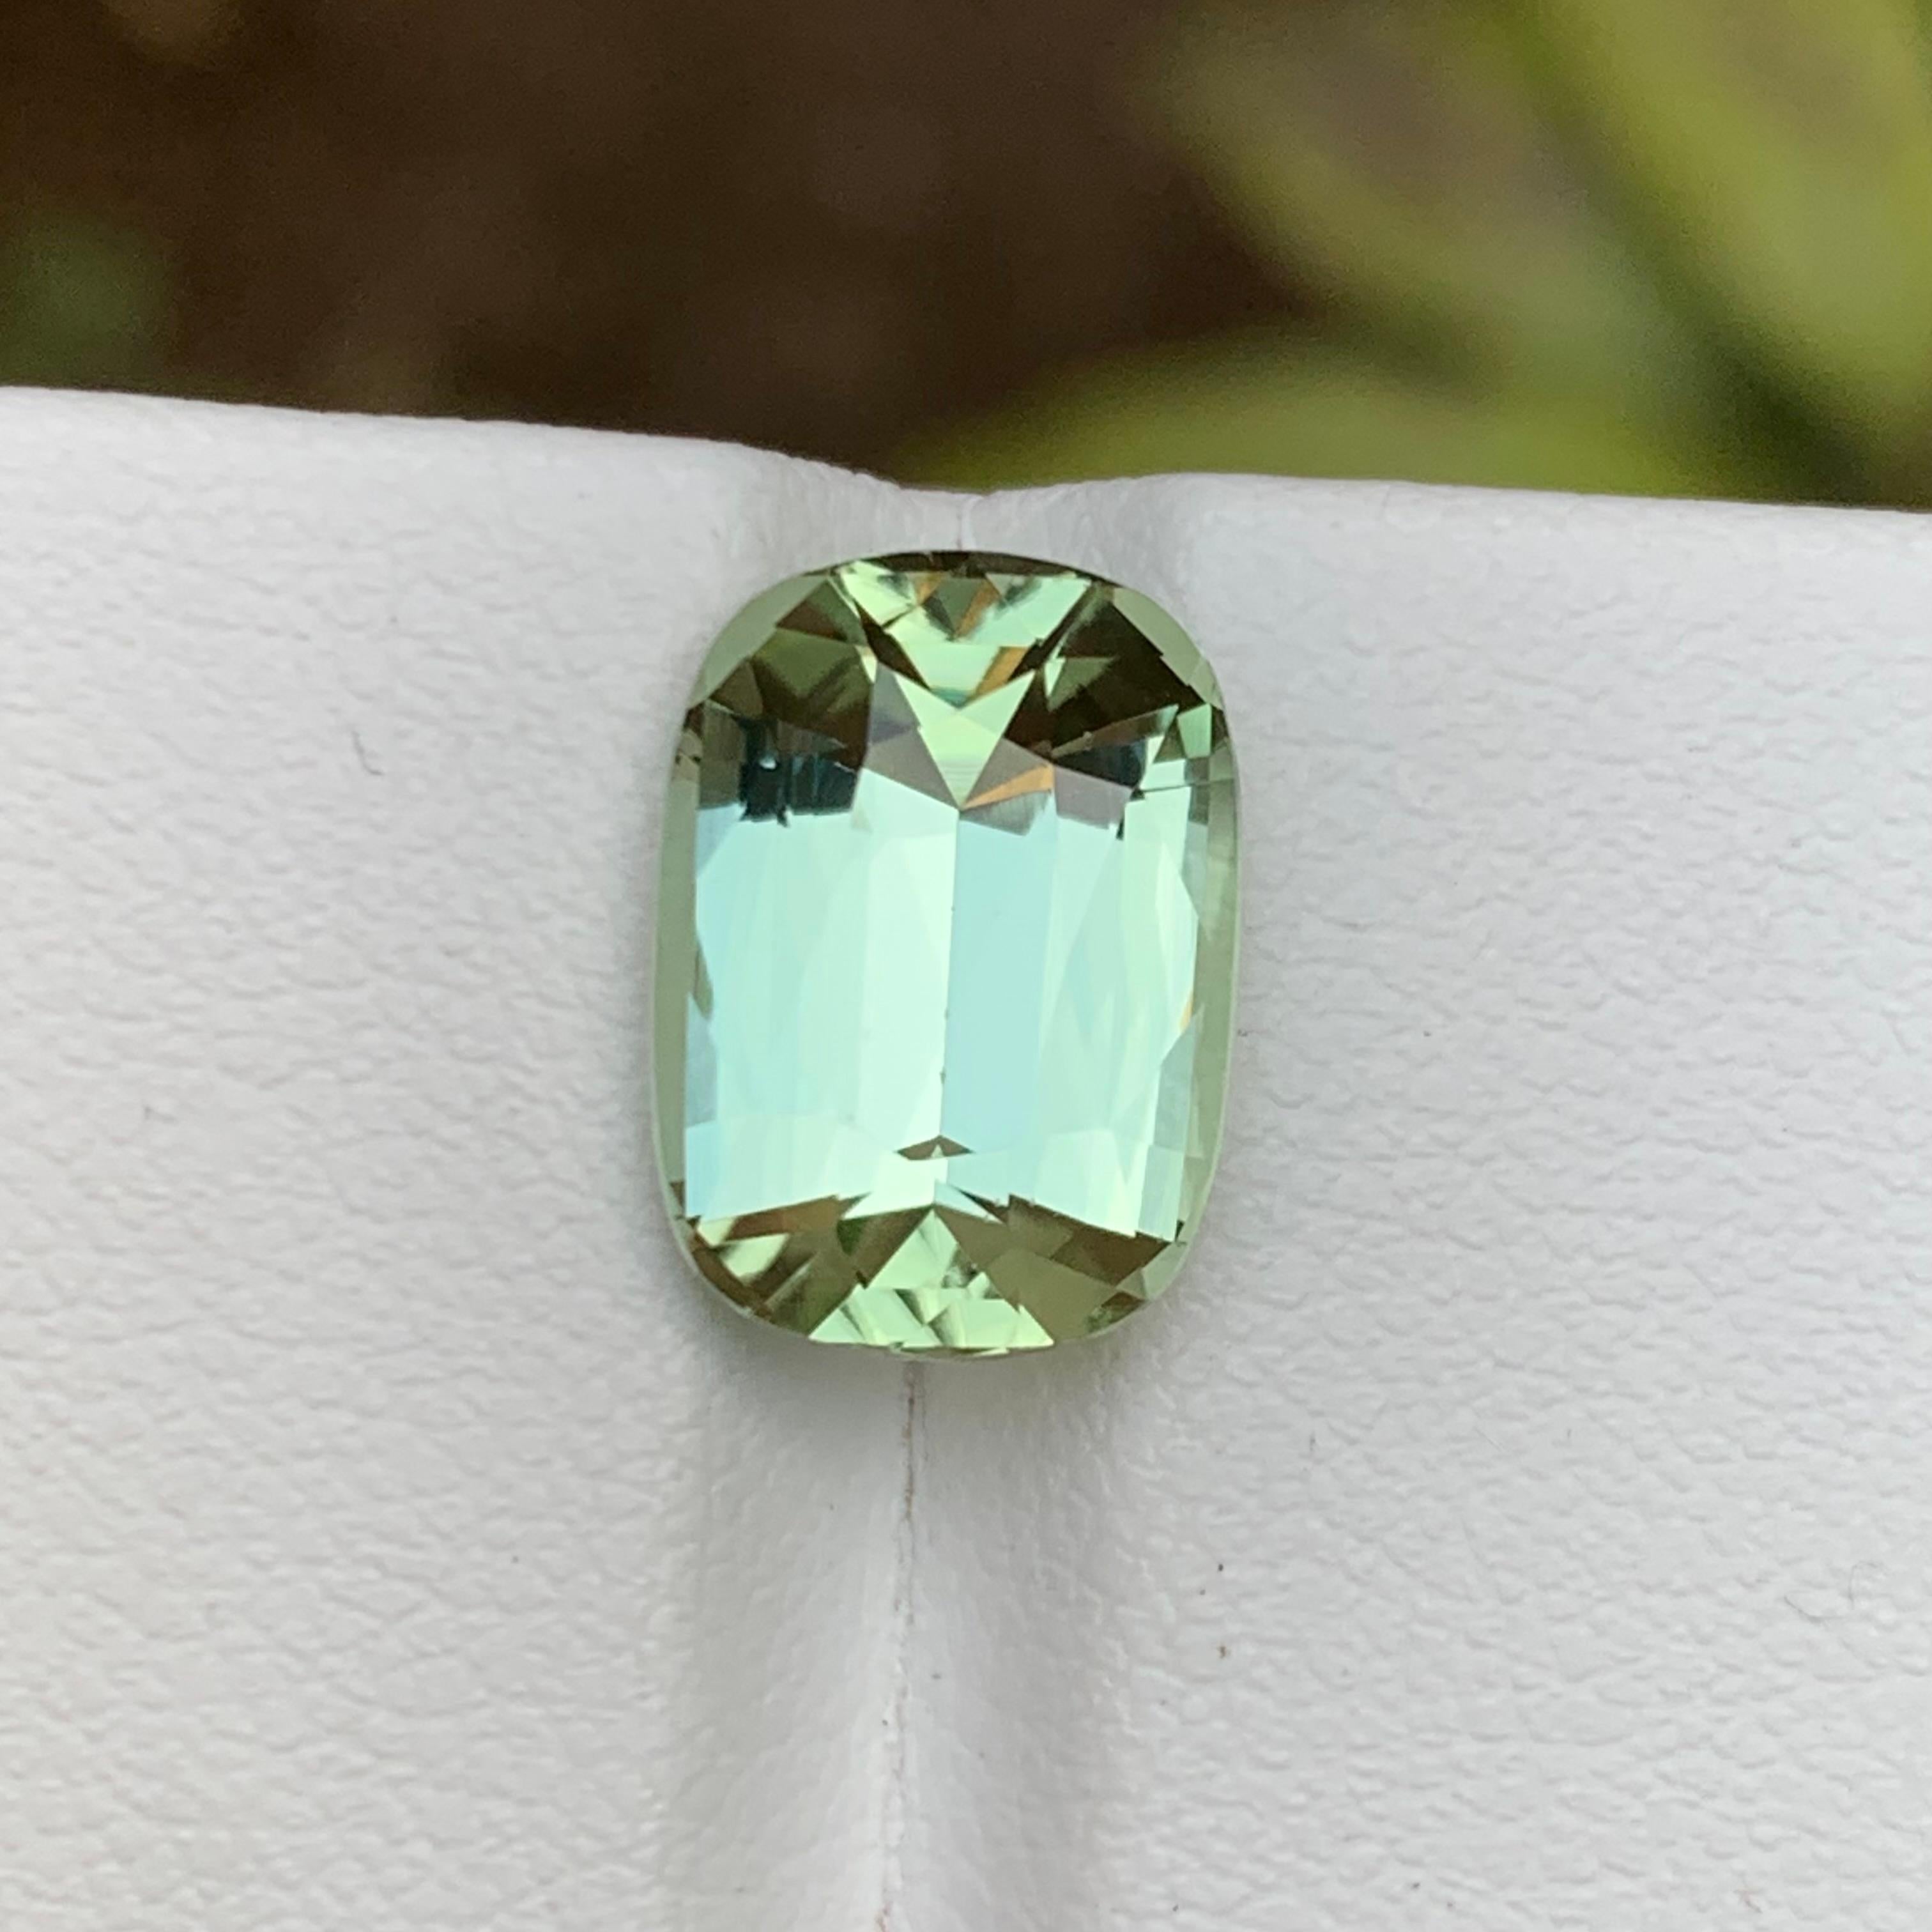 Pale Green Natural Tourmaline Gemstone 5.35 Ct Step Cushion Cut for Ring/Pendant For Sale 3